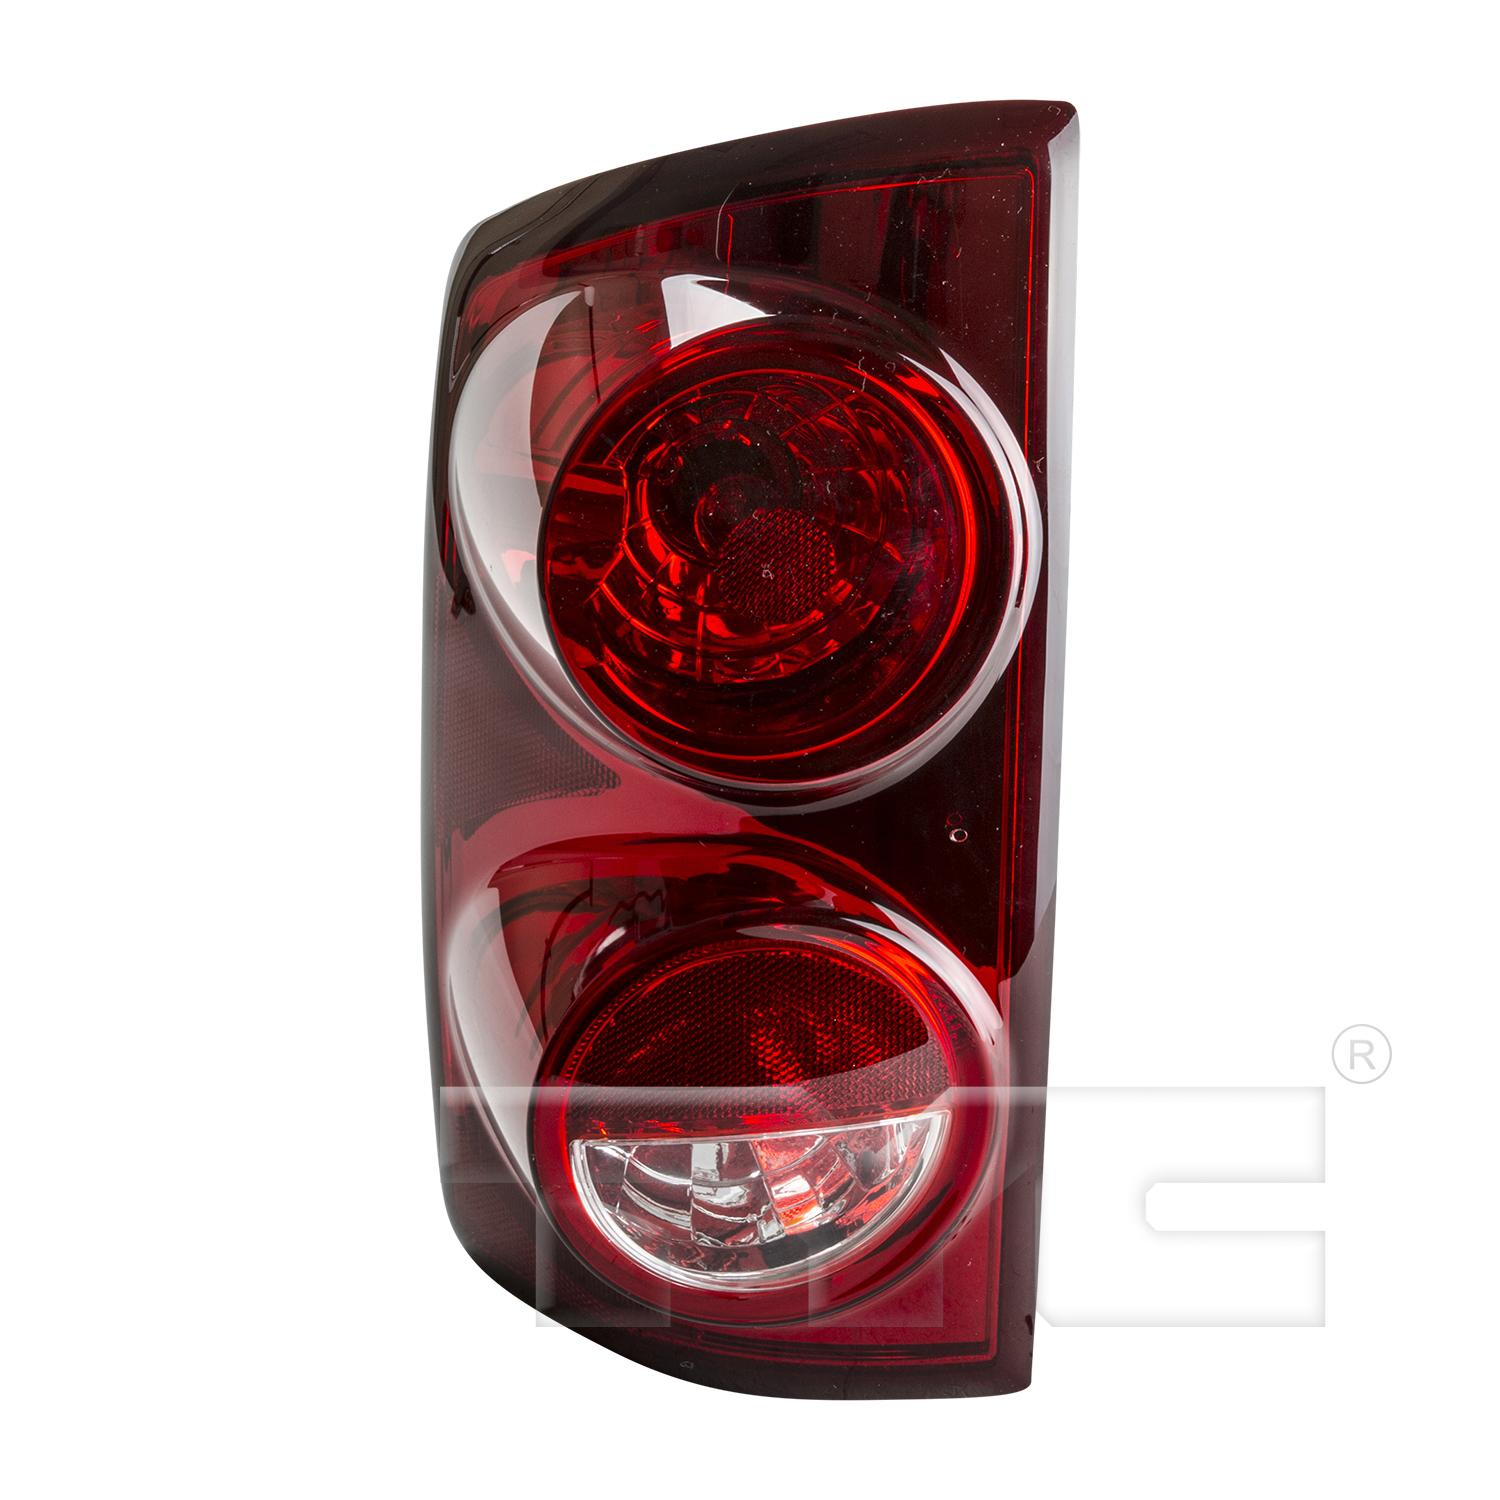 Aftermarket TAILLIGHTS for DODGE - RAM 1500, RAM 1500,07-08,LT Taillamp assy